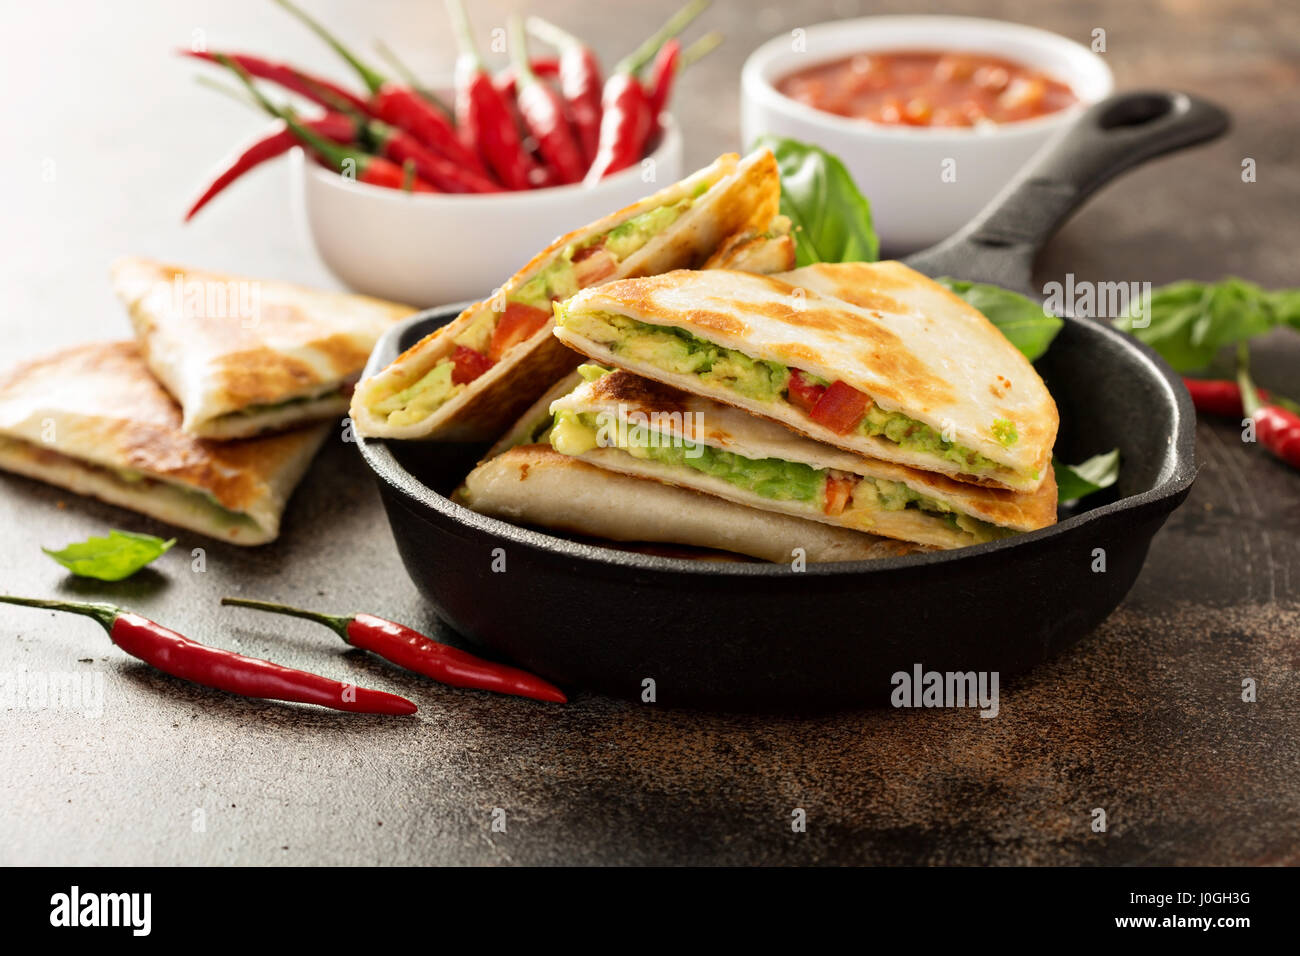 Vegan quesadillas with avocado and red pepper Stock Photo